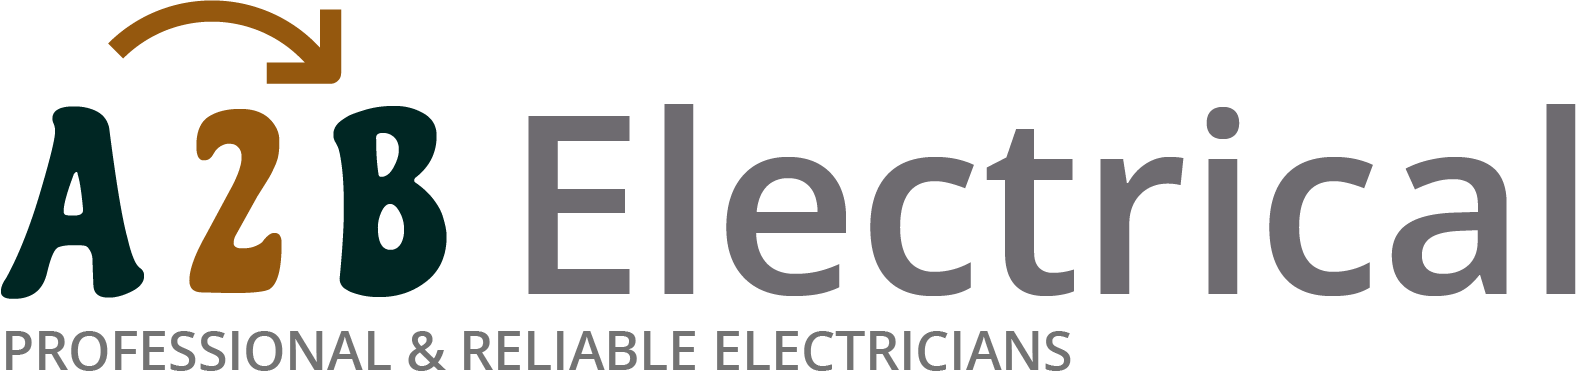 If you have electrical wiring problems in North Wembley, we can provide an electrician to have a look for you. 